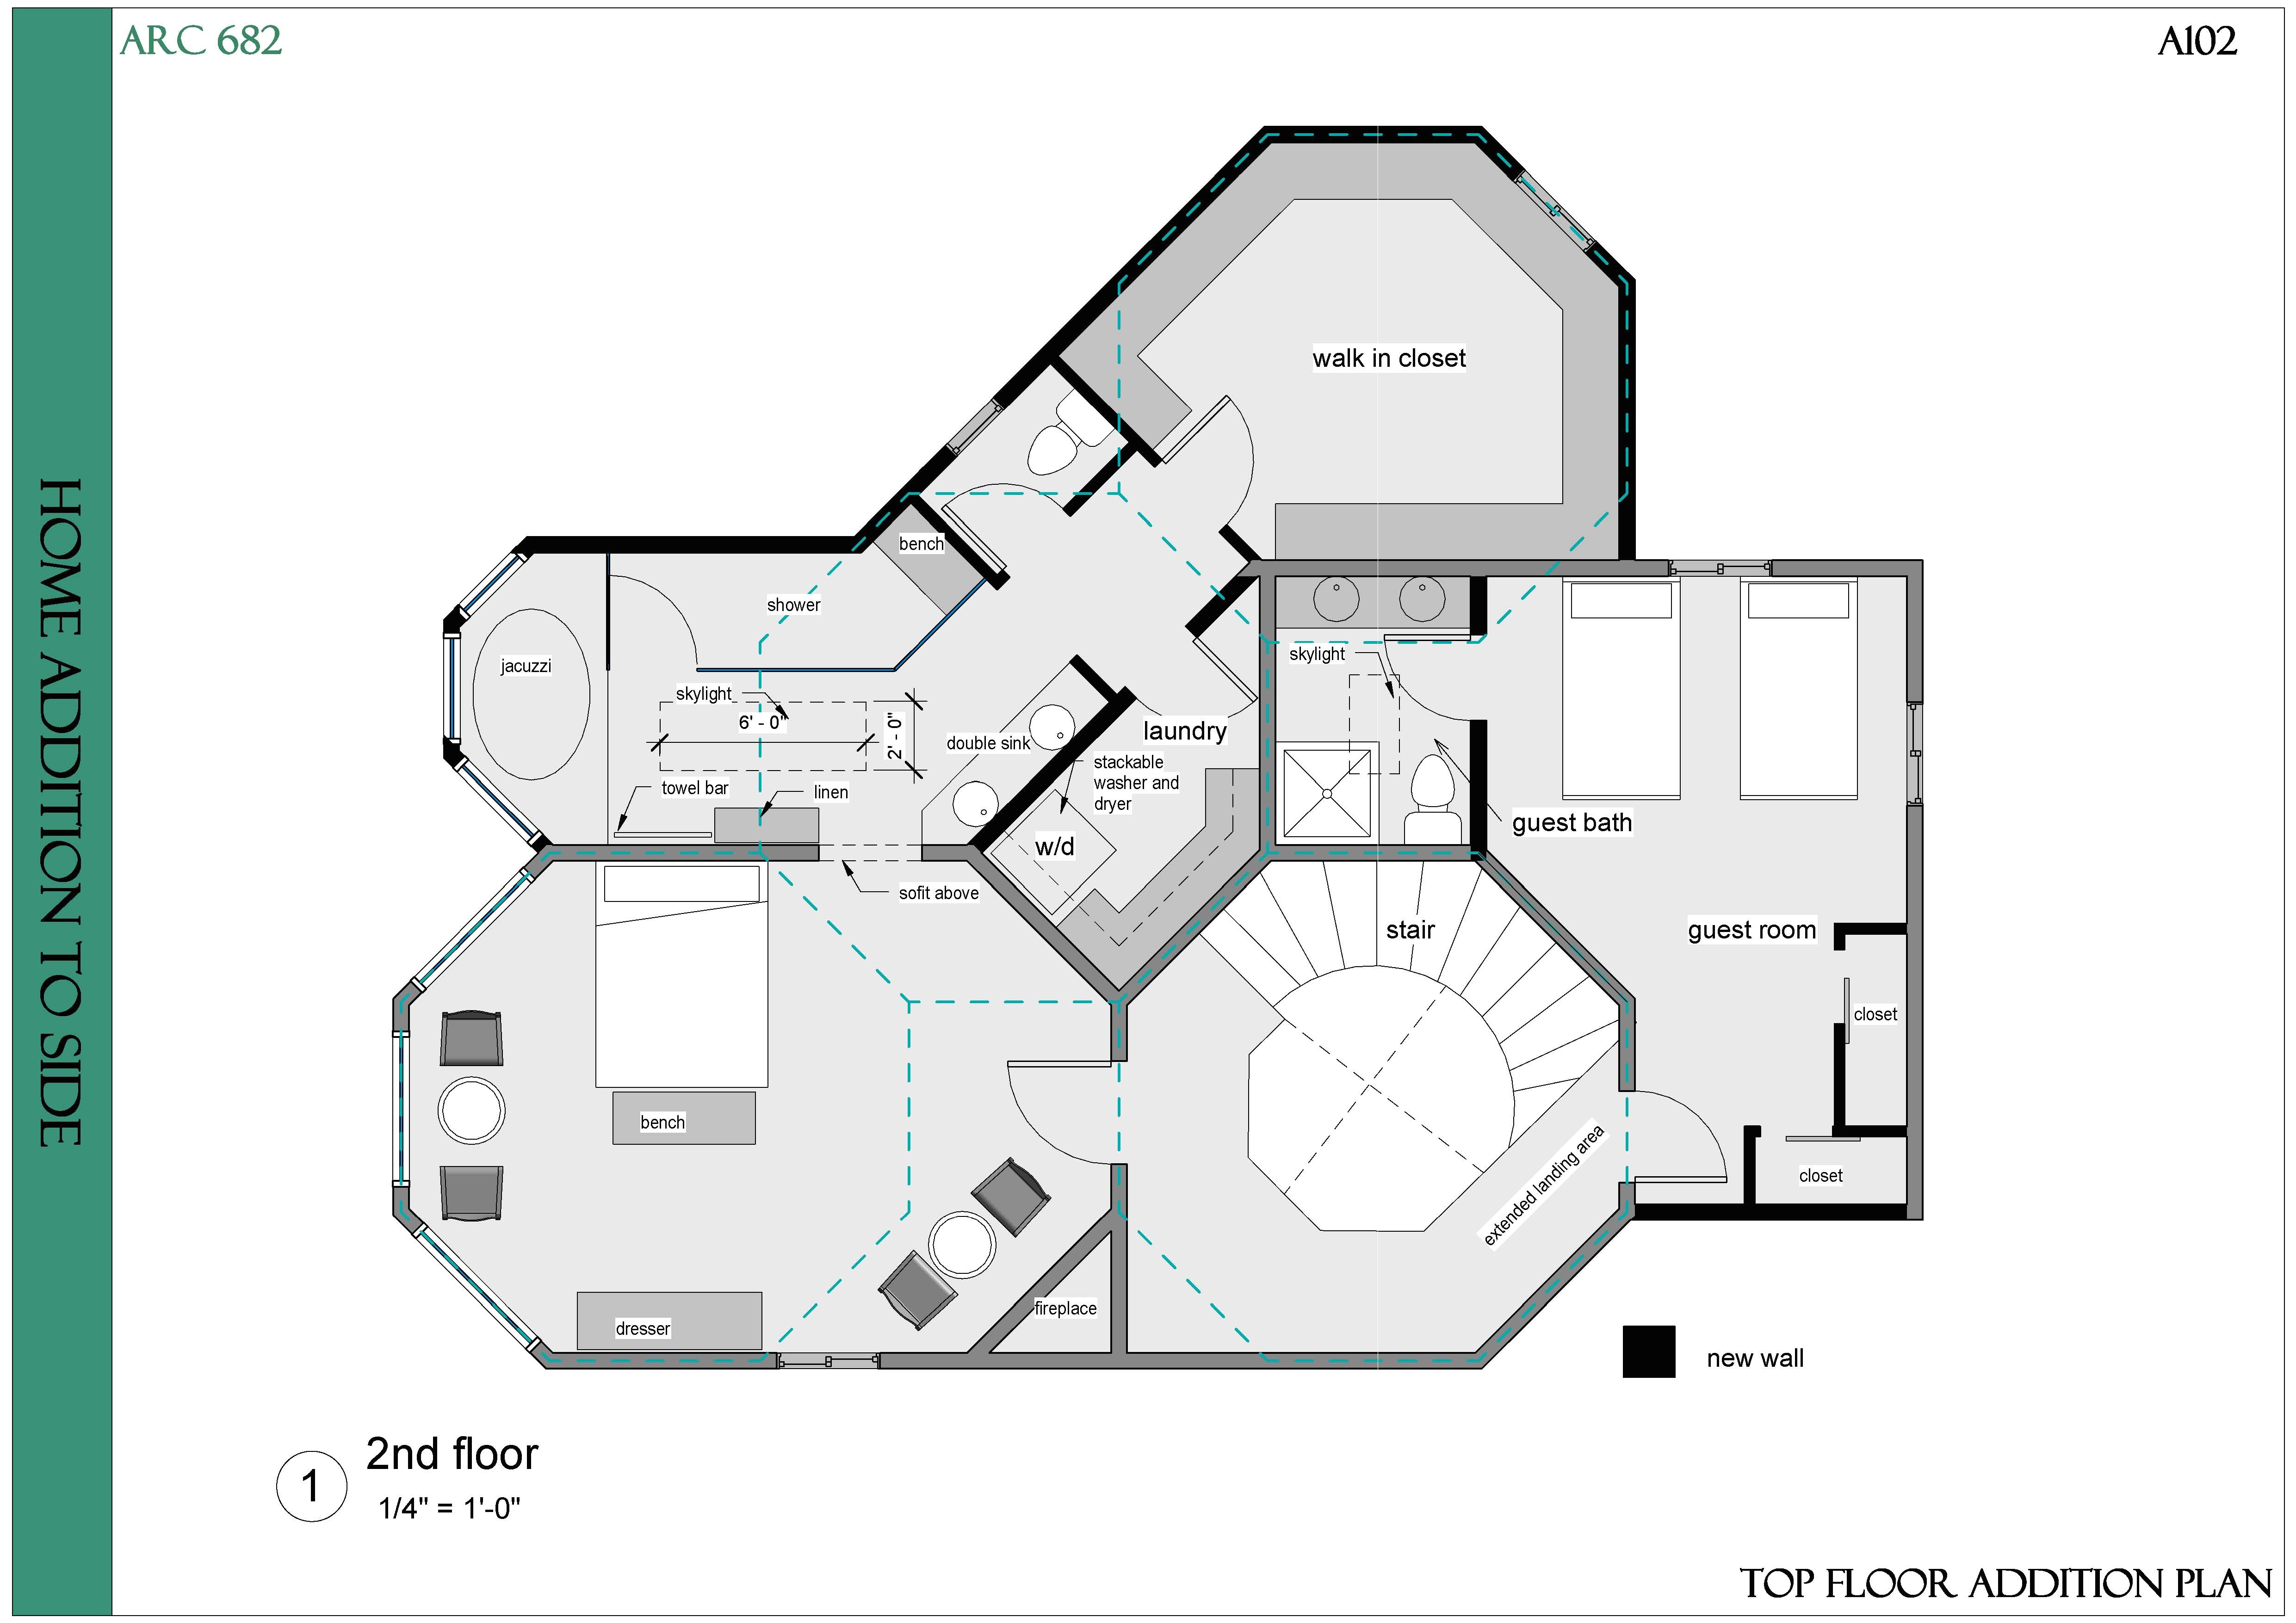 19 photos and inspiration octagon home floor plans